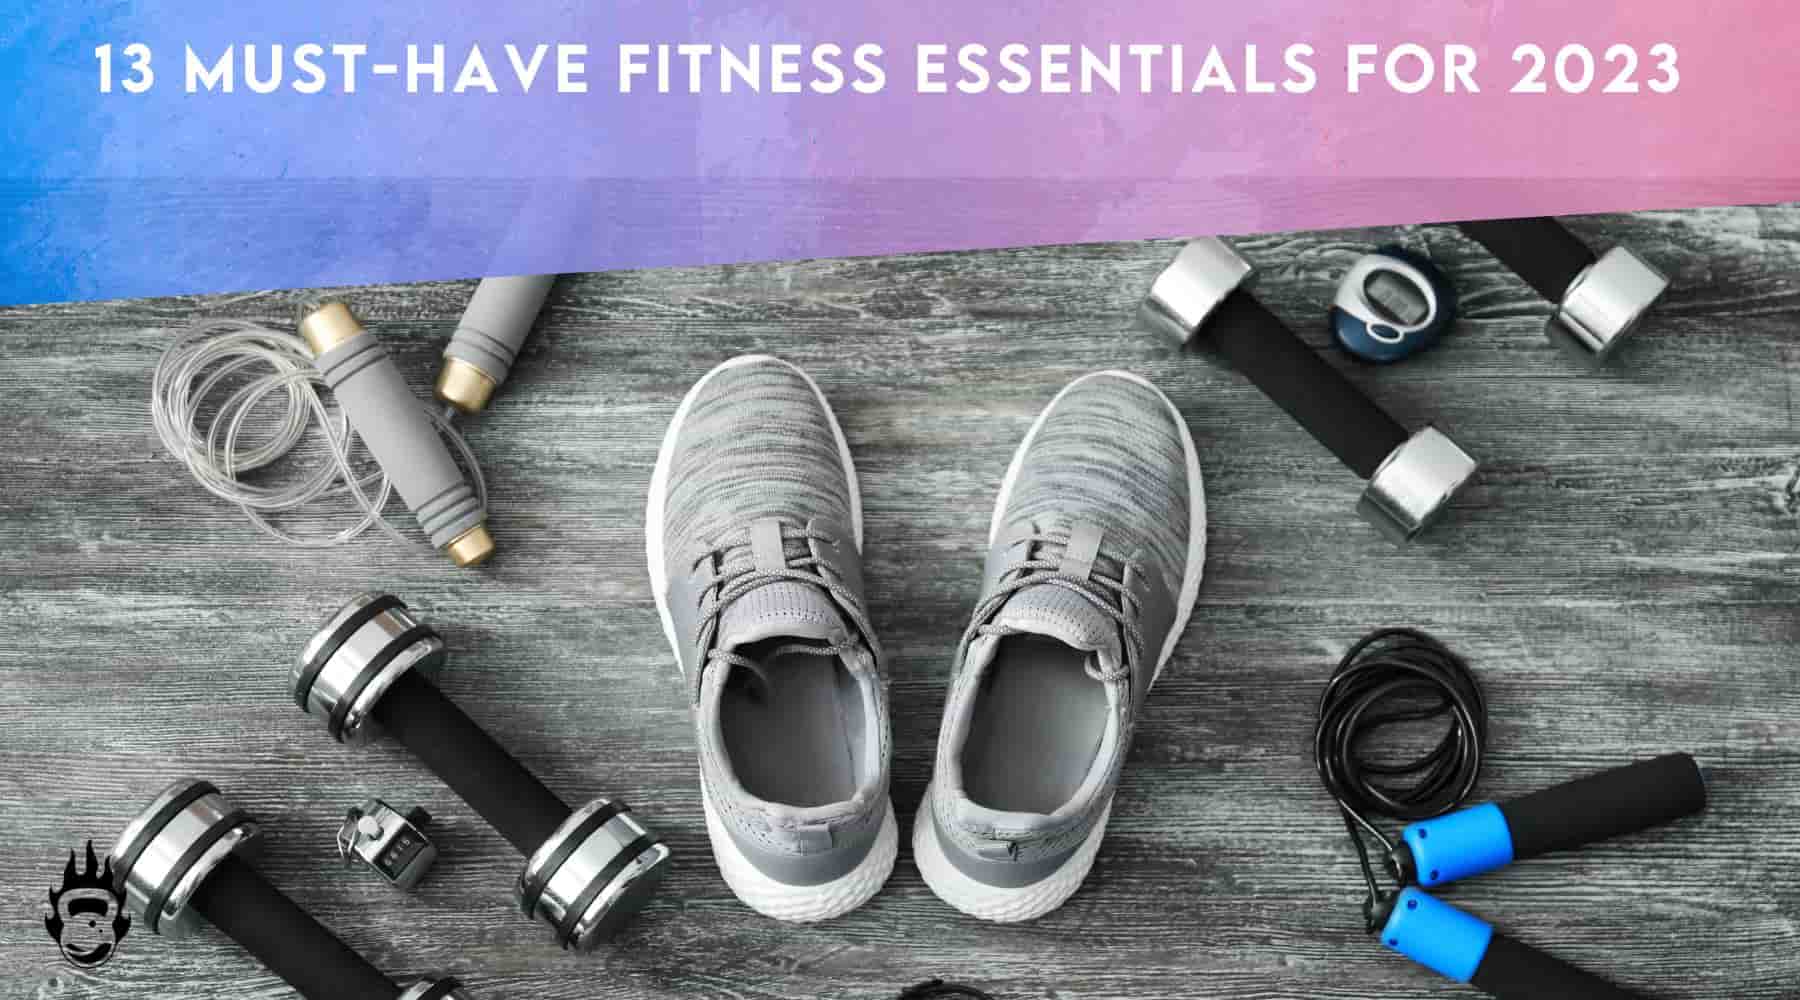 Fitness Products Every Fitness Enthusiast Should Have - Get Back Into  Fitness